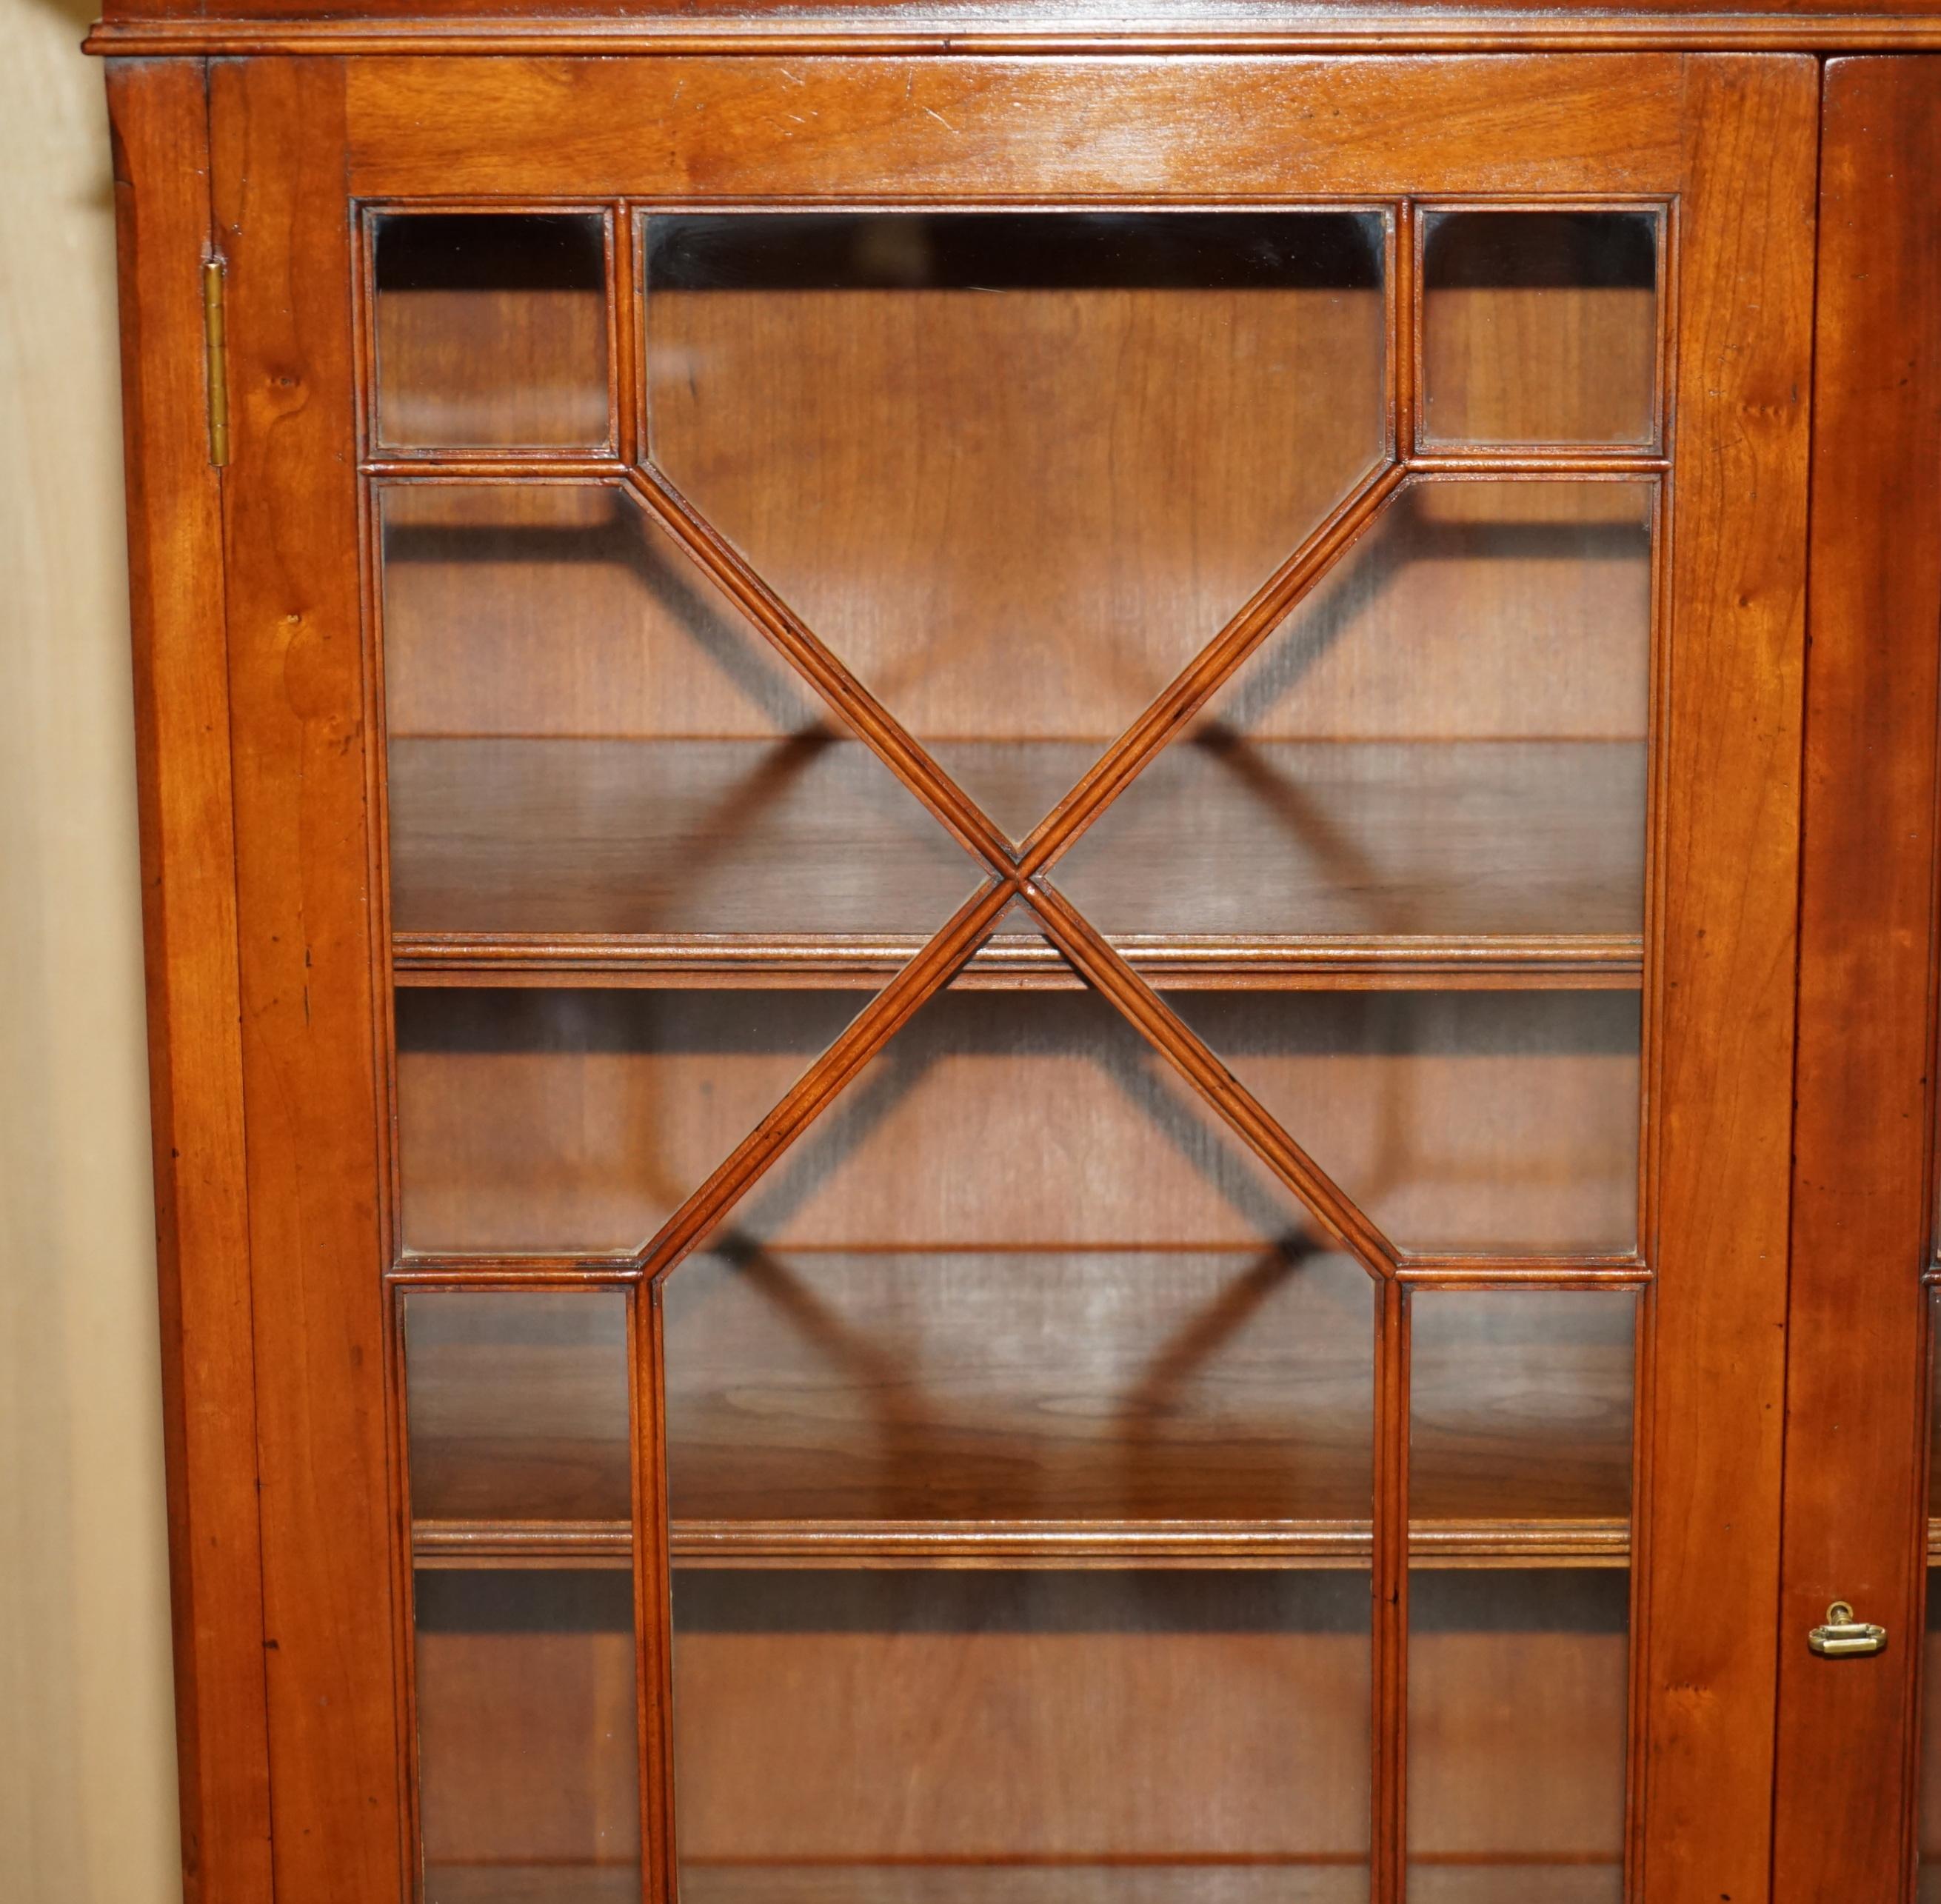 20th Century HARRODS LONDON REH KENNEDY ASTRAL GLAZED LiBRARY BOOKCASE CUPBOARD STORAGE UNIT For Sale